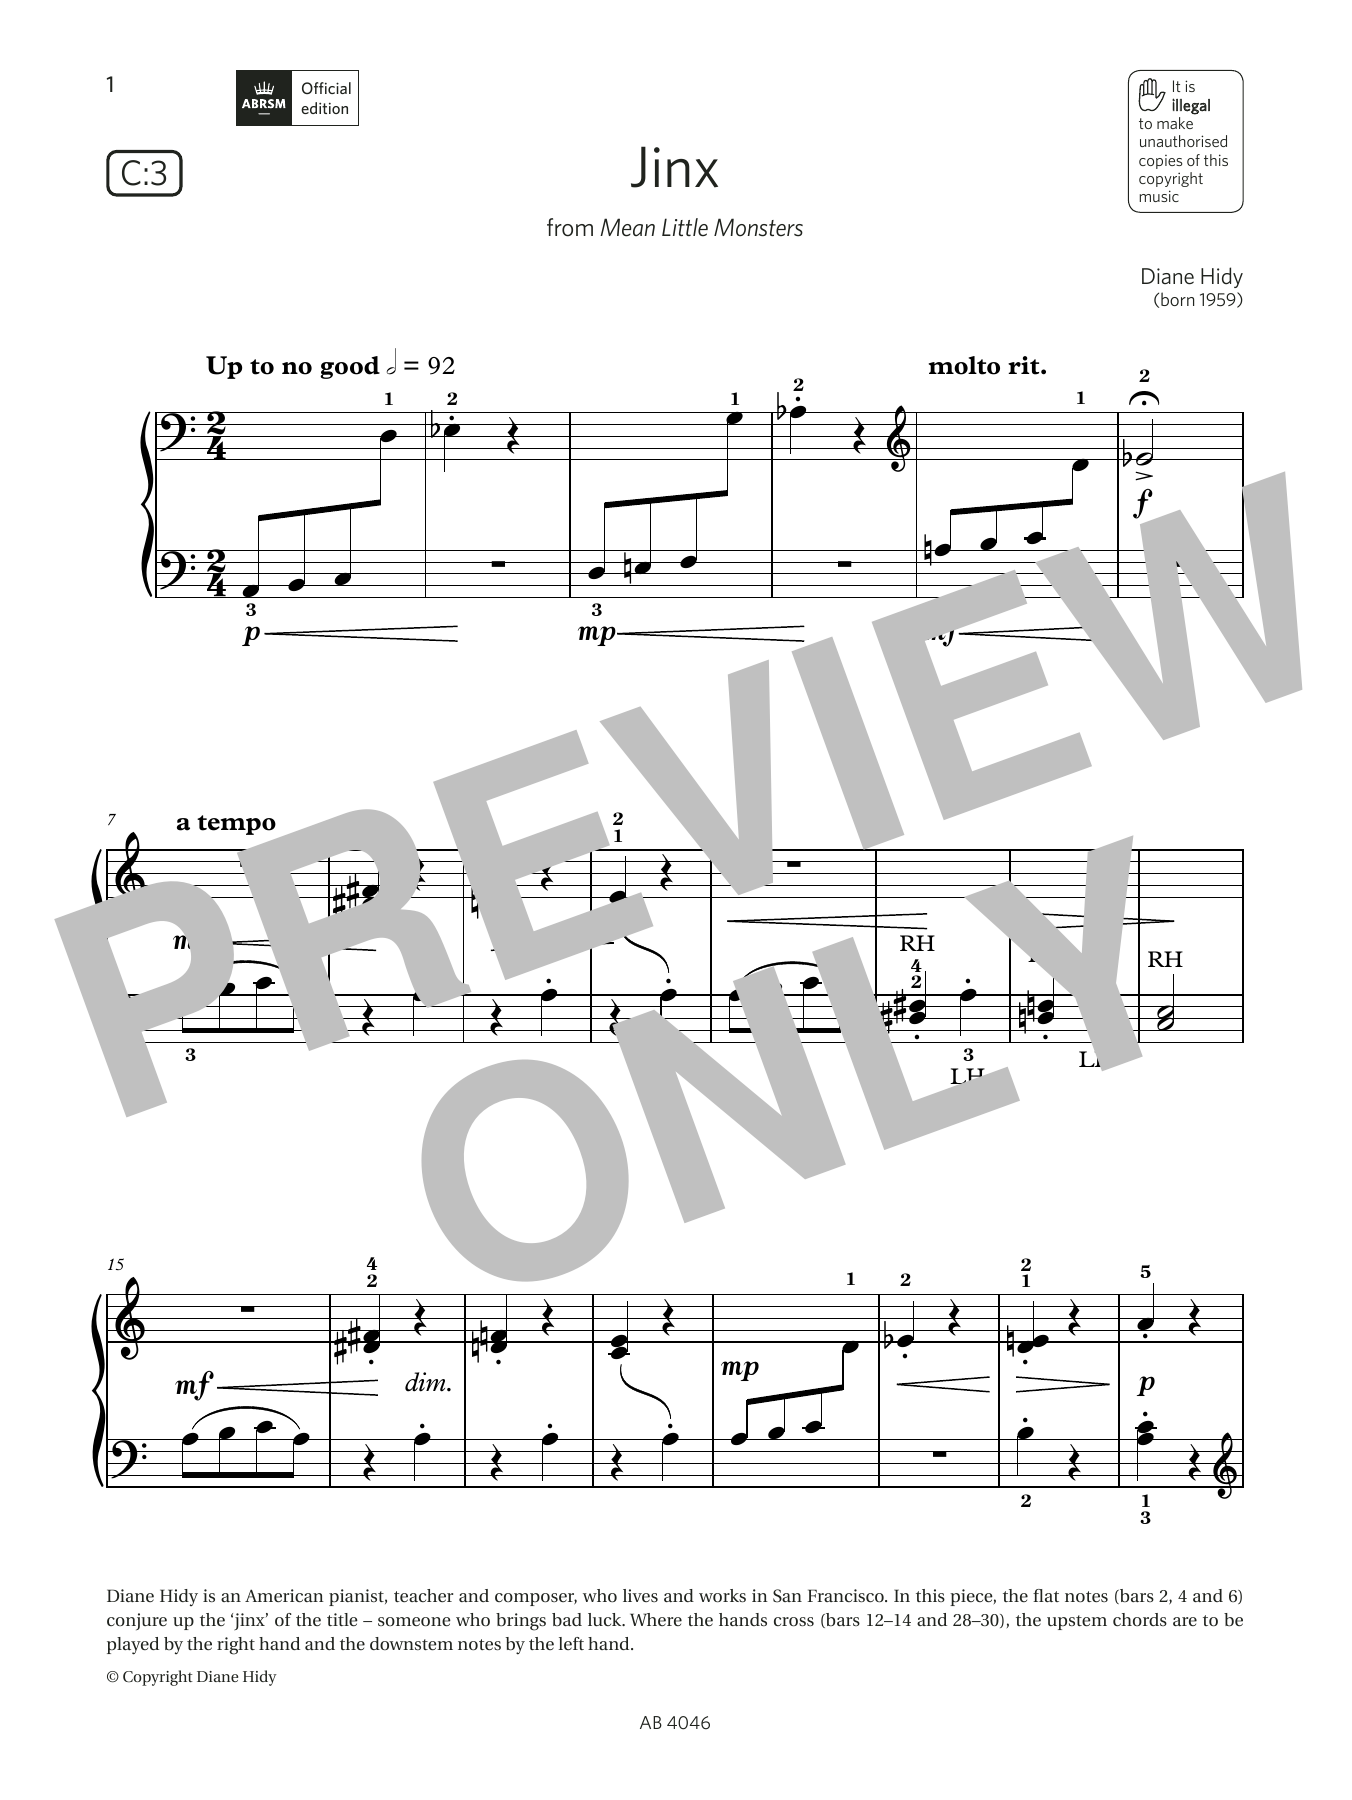 Download Diane Hidy Jinx (Grade Initial, list C3, from the Sheet Music